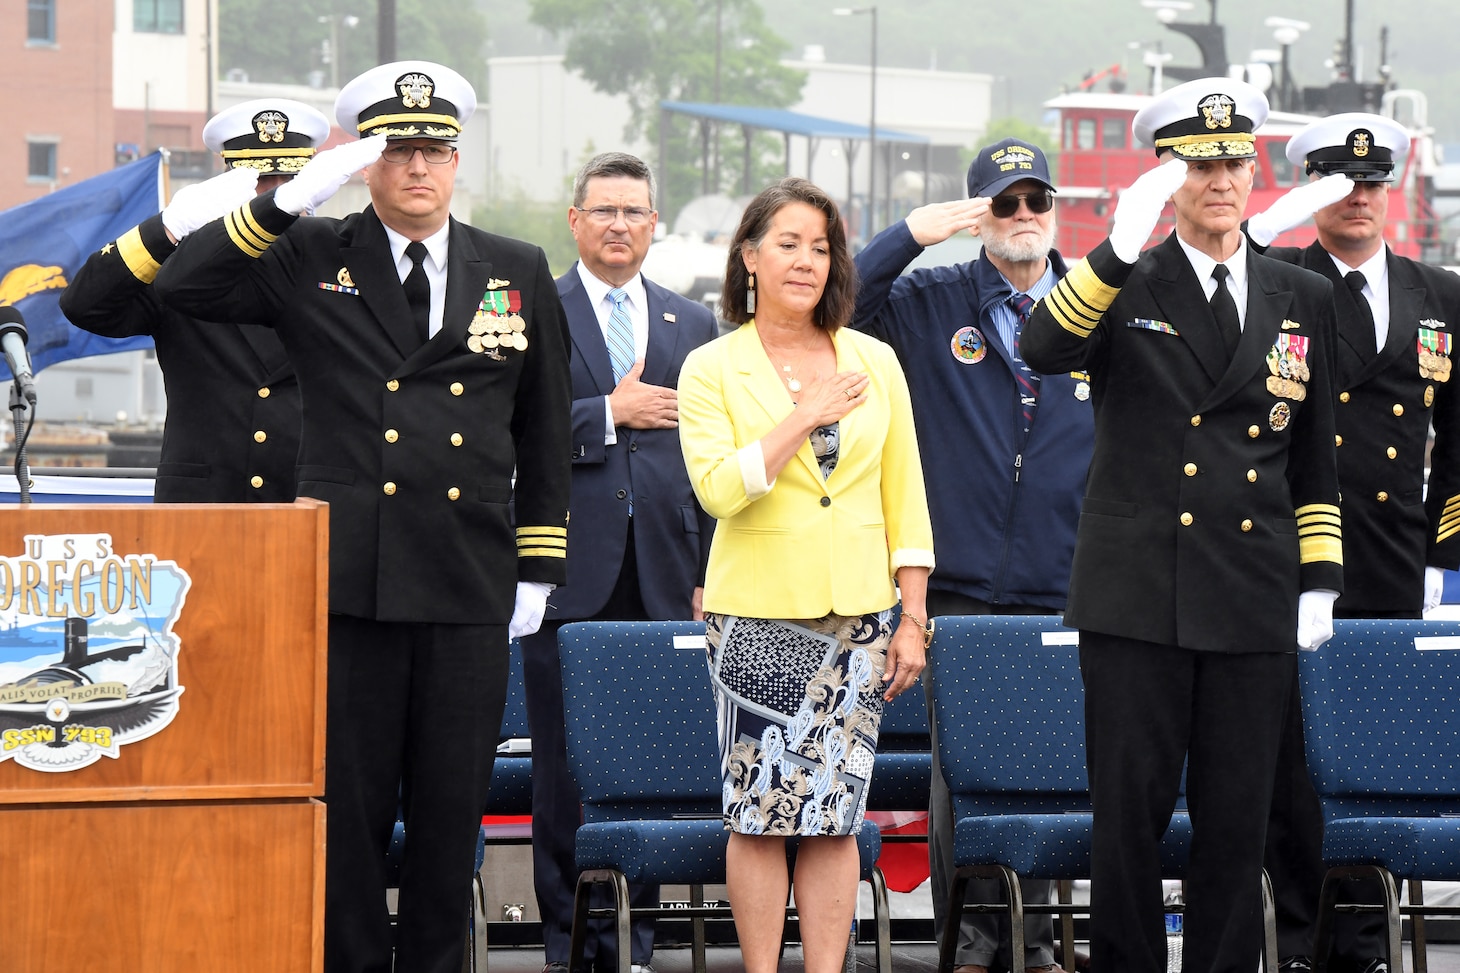 Dana Richardson, ship sponsor for the Virginia-class submarine USS Oregon (SSN 793), honors the colors alongside Oregon’s commanding officer Cmdr. Lacy Lodmell, and Adm. Frank Caldwell, director of the Naval Nuclear Propulsion Program, during a commissioning ceremony in Groton, Conn., May 28, 2022.